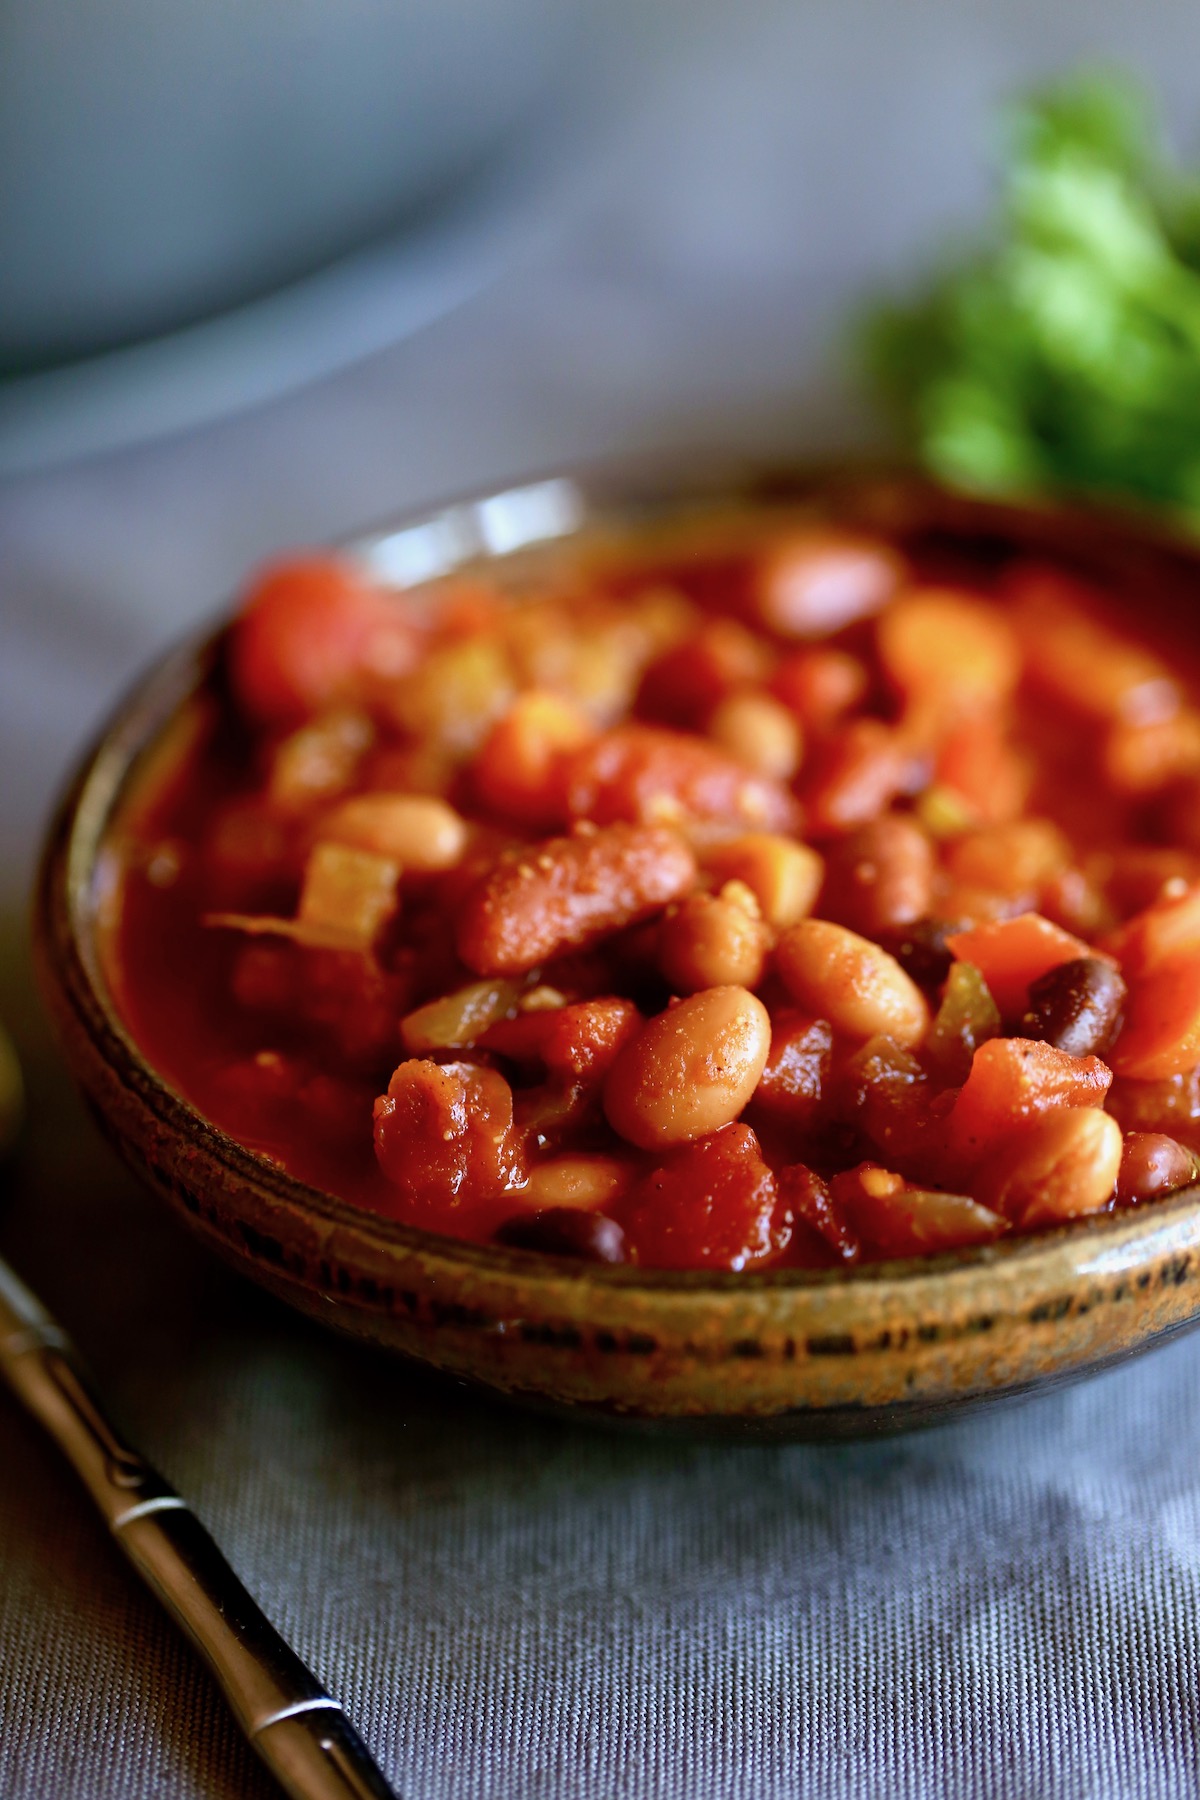 vegan three bean chili in a bowl without garnishes